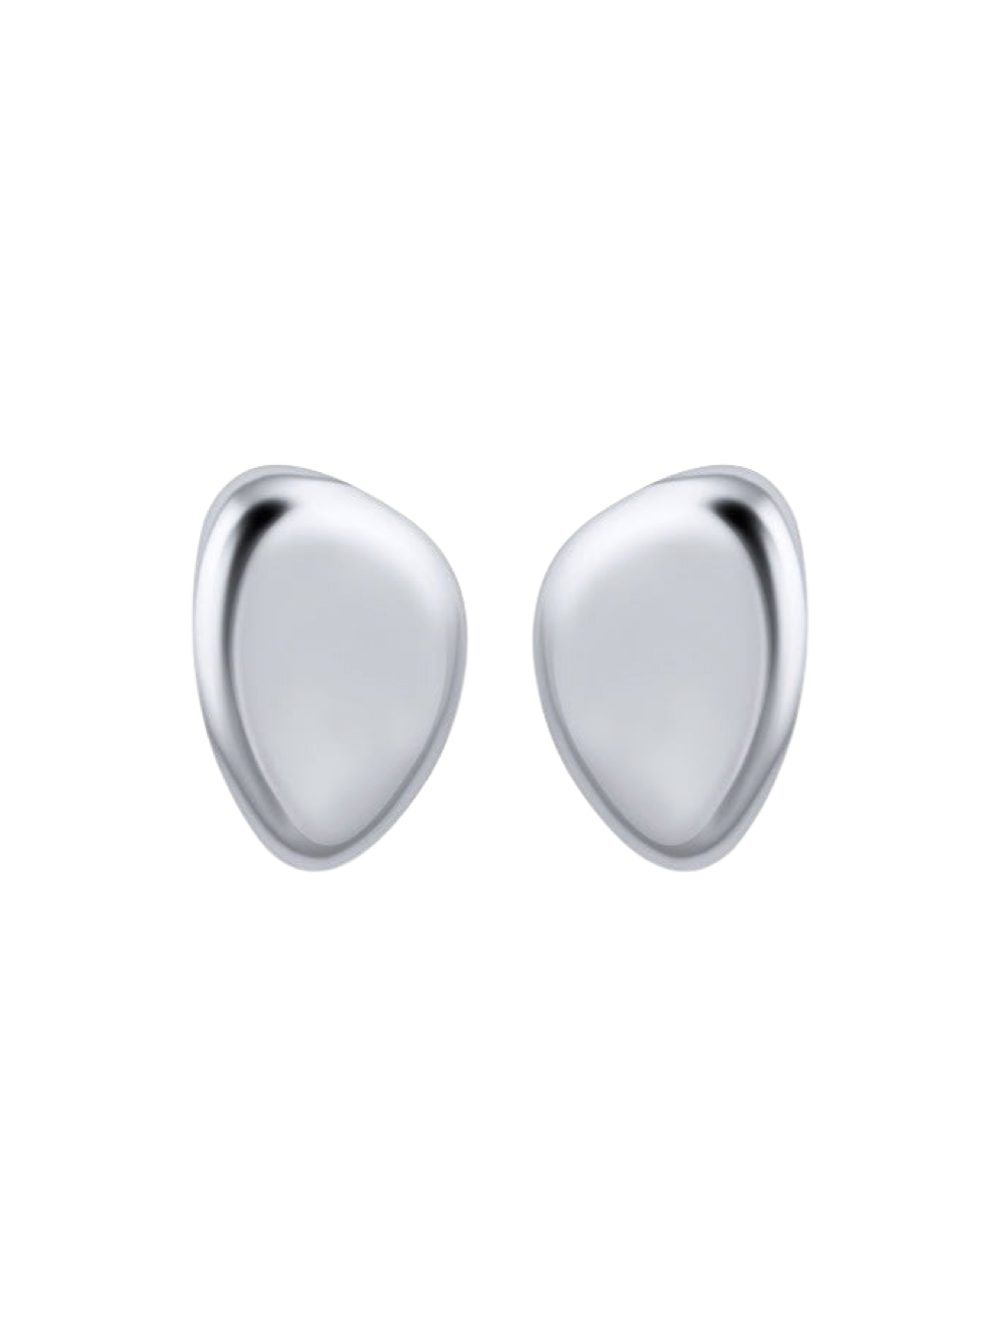 Christina Caruso Small Oval Earrings in Rhodium